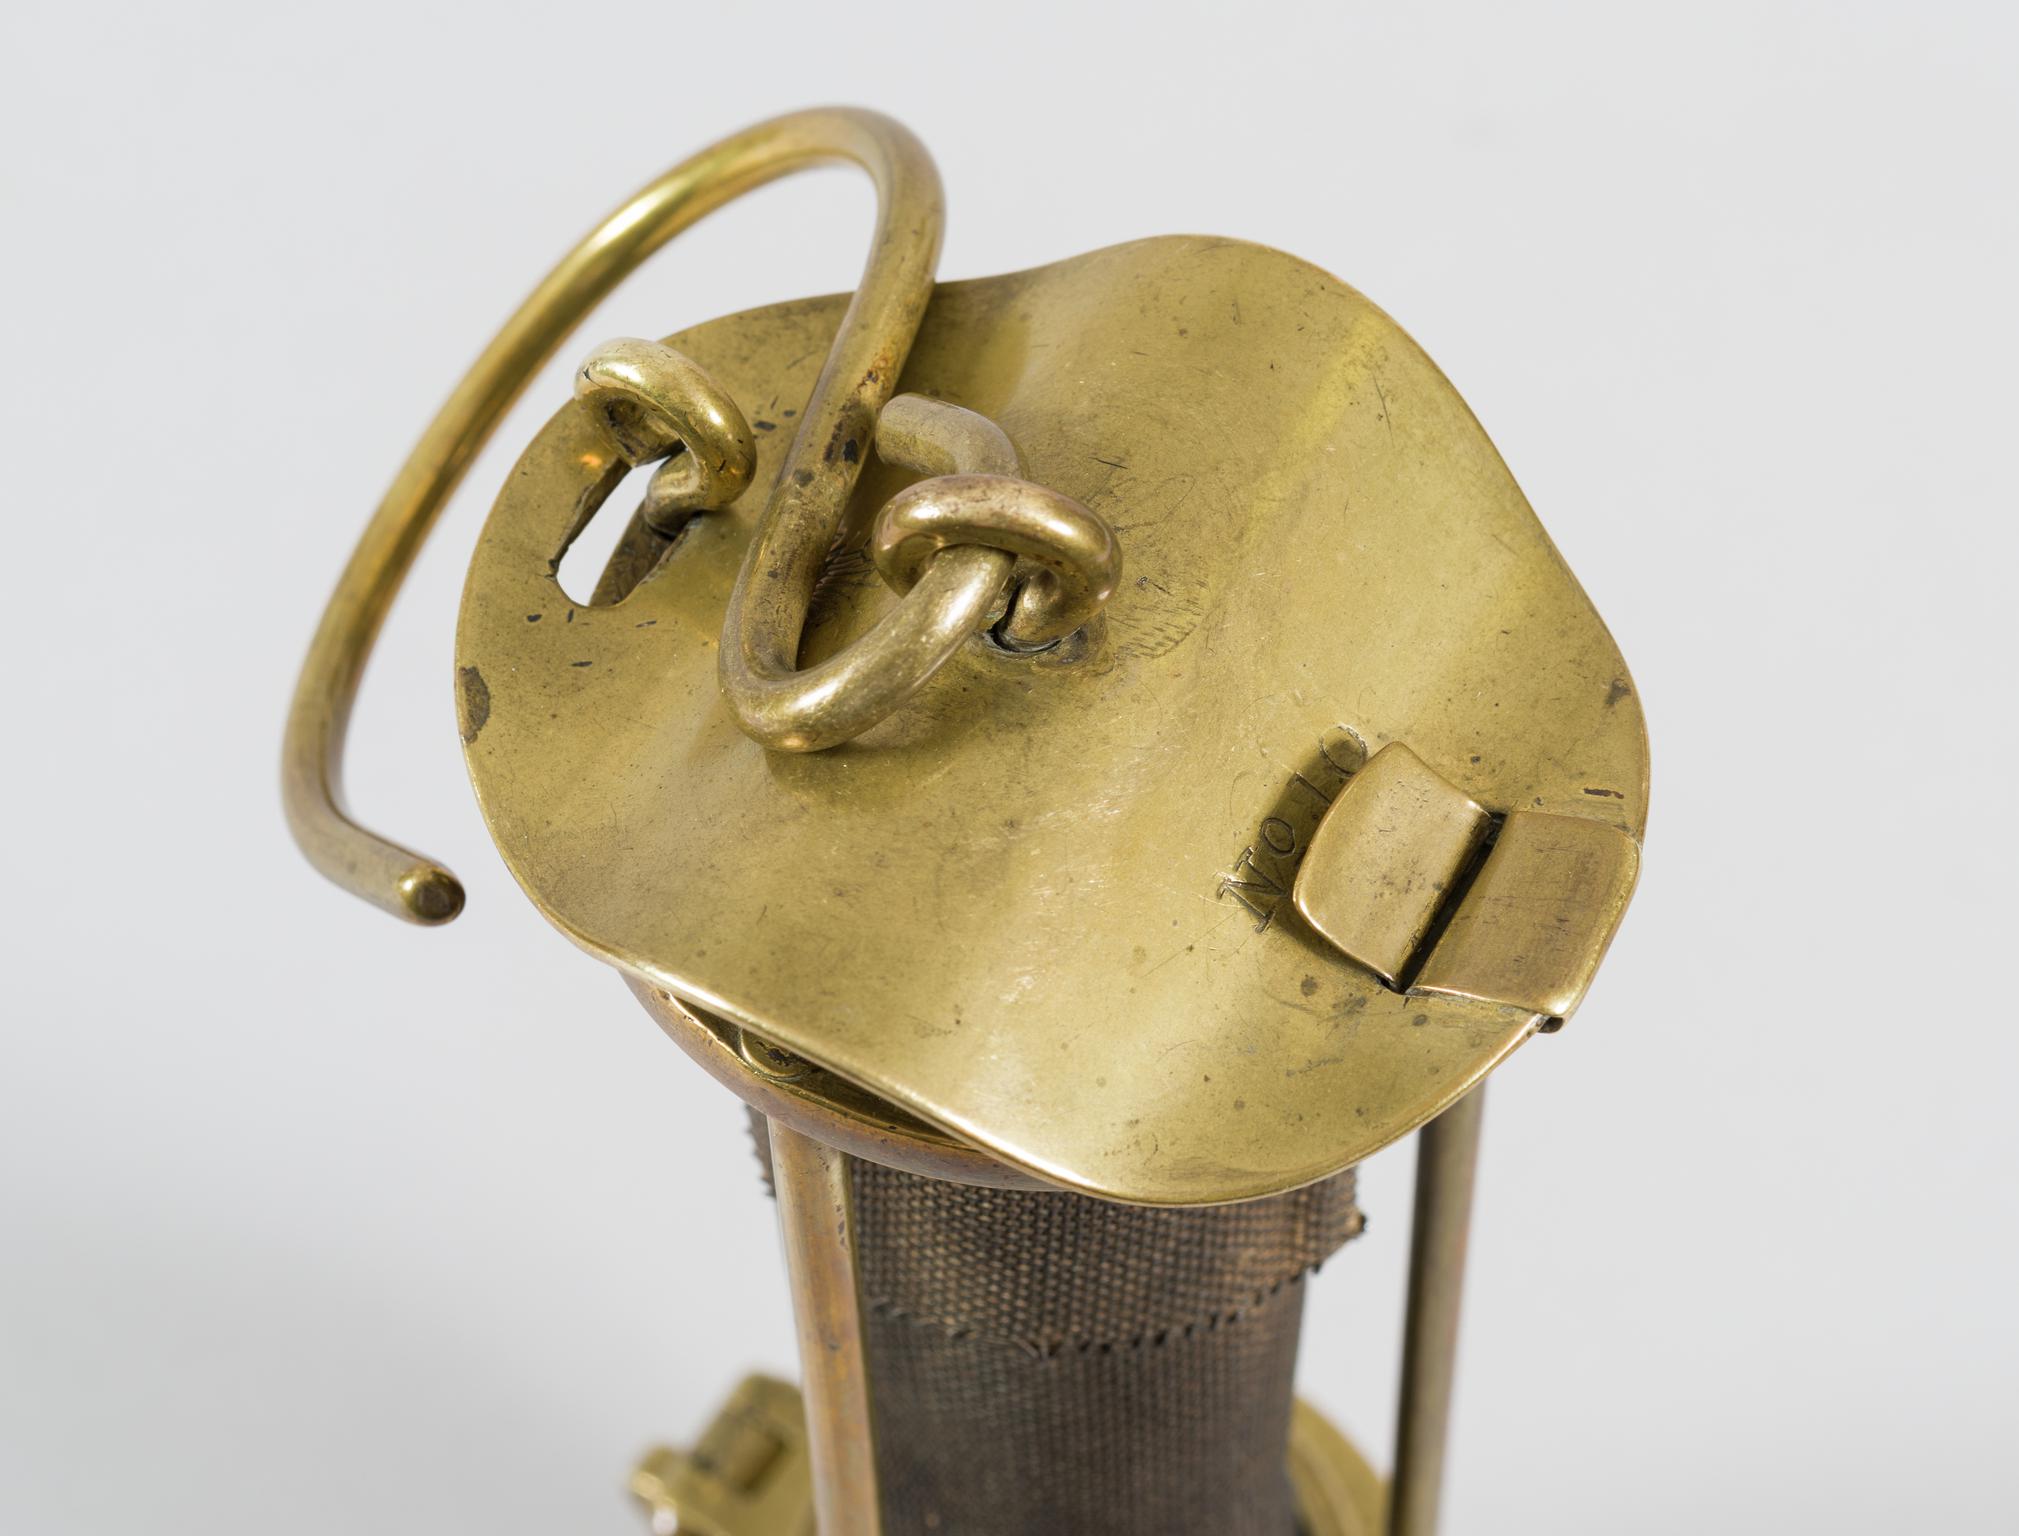 Davy No 10 flame safety lamp